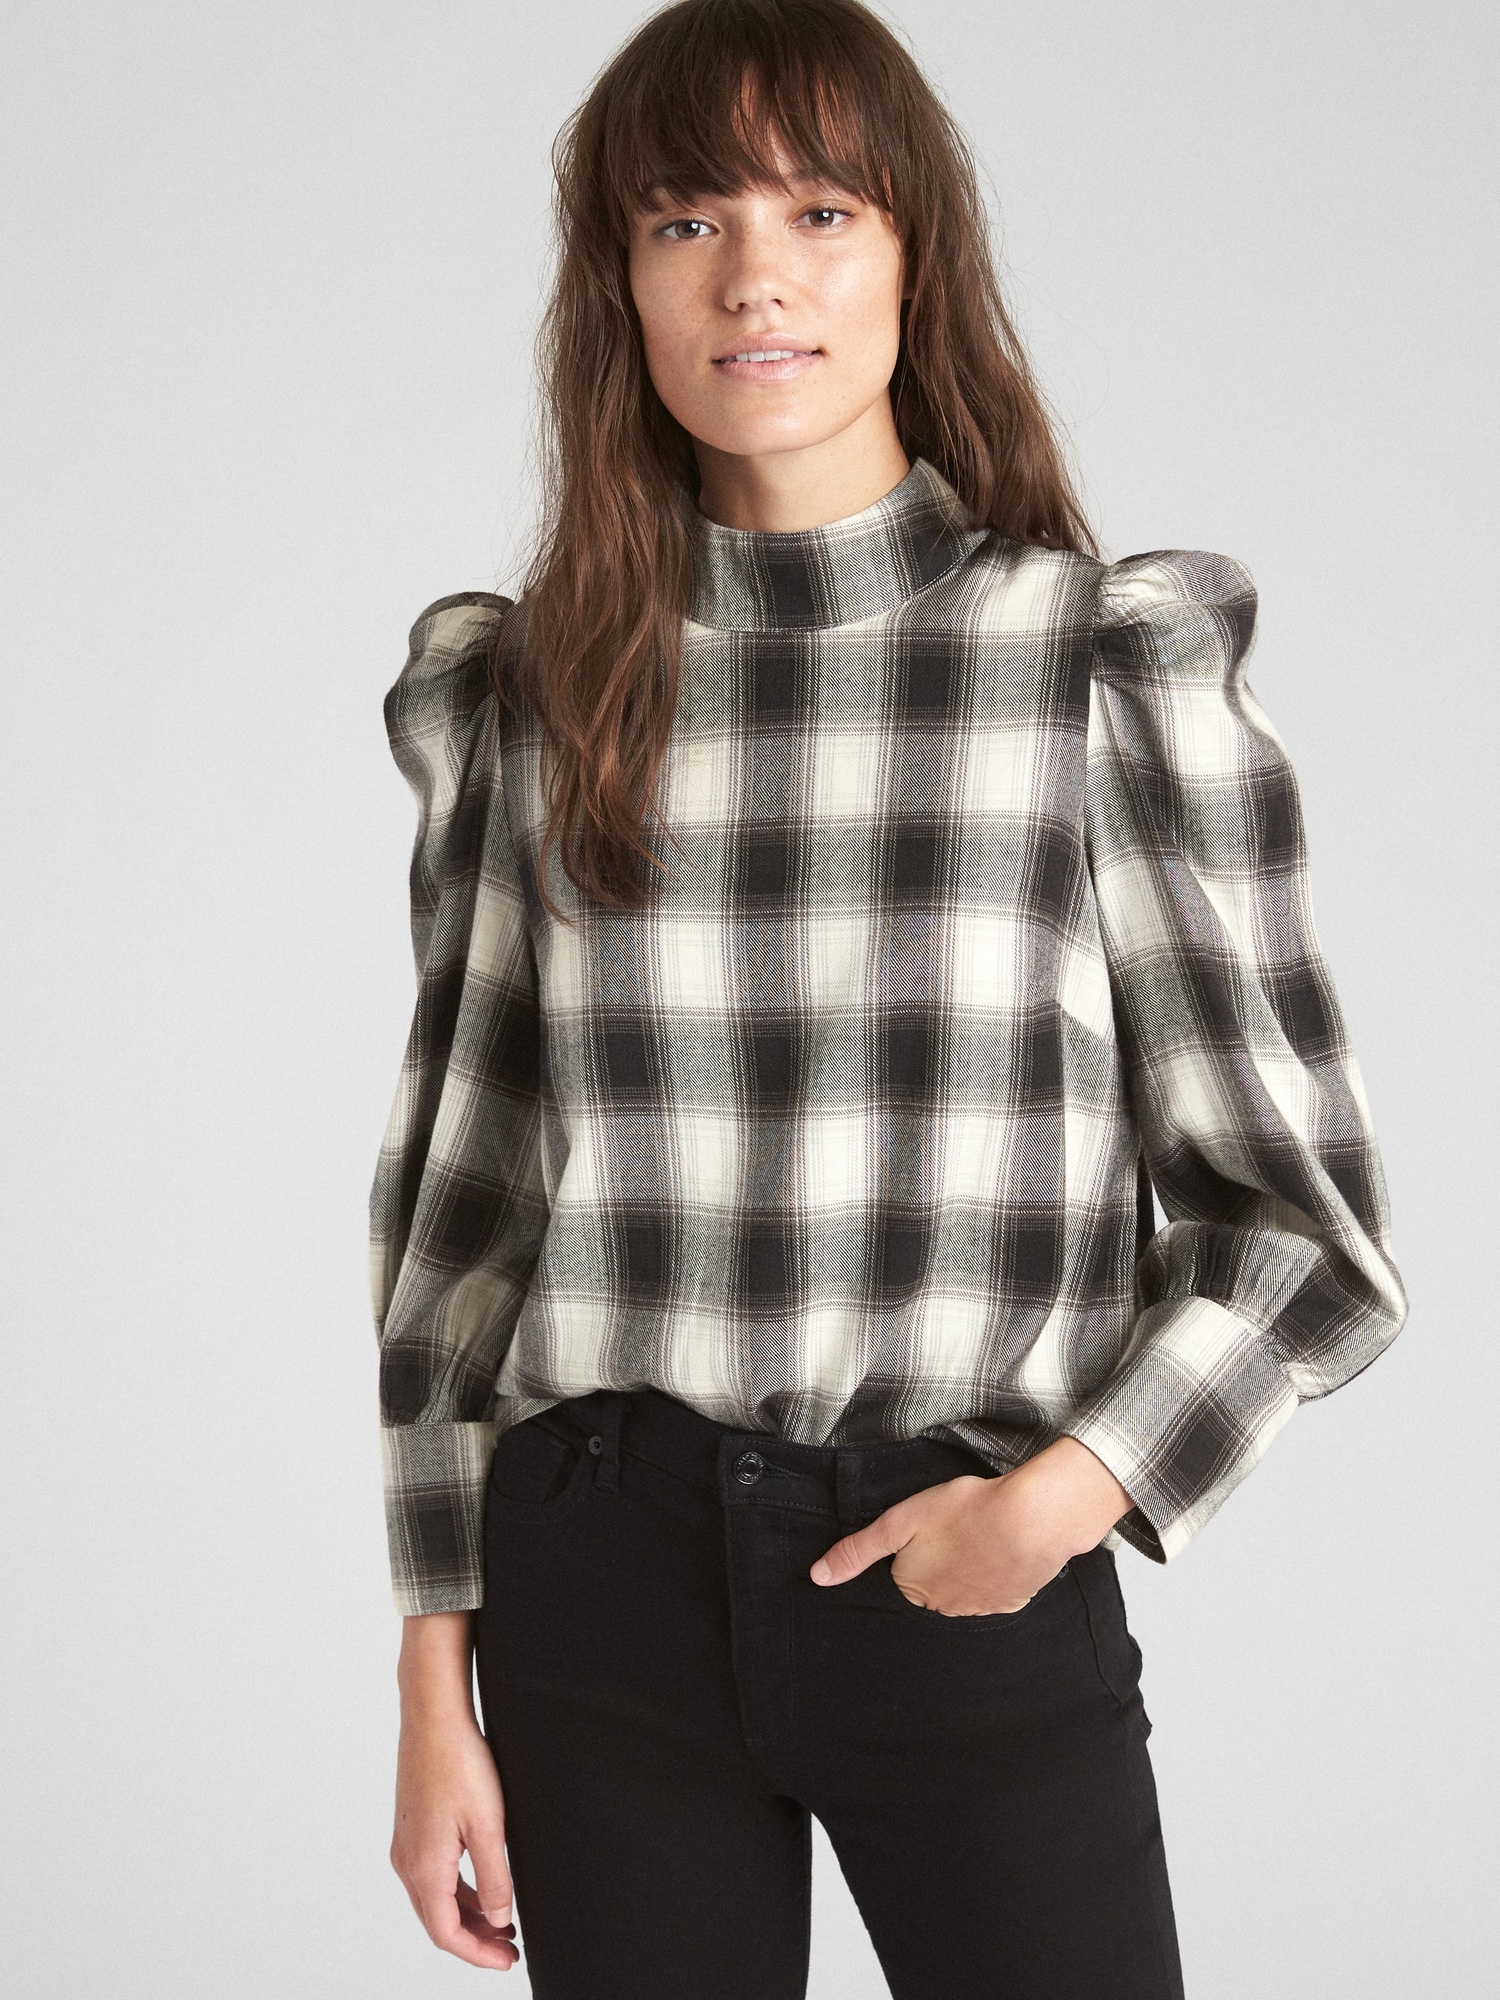 9 Best Womens Flannel Shirts for Fall 2018 - Cute Flannel & Plaid Shirts  for Women